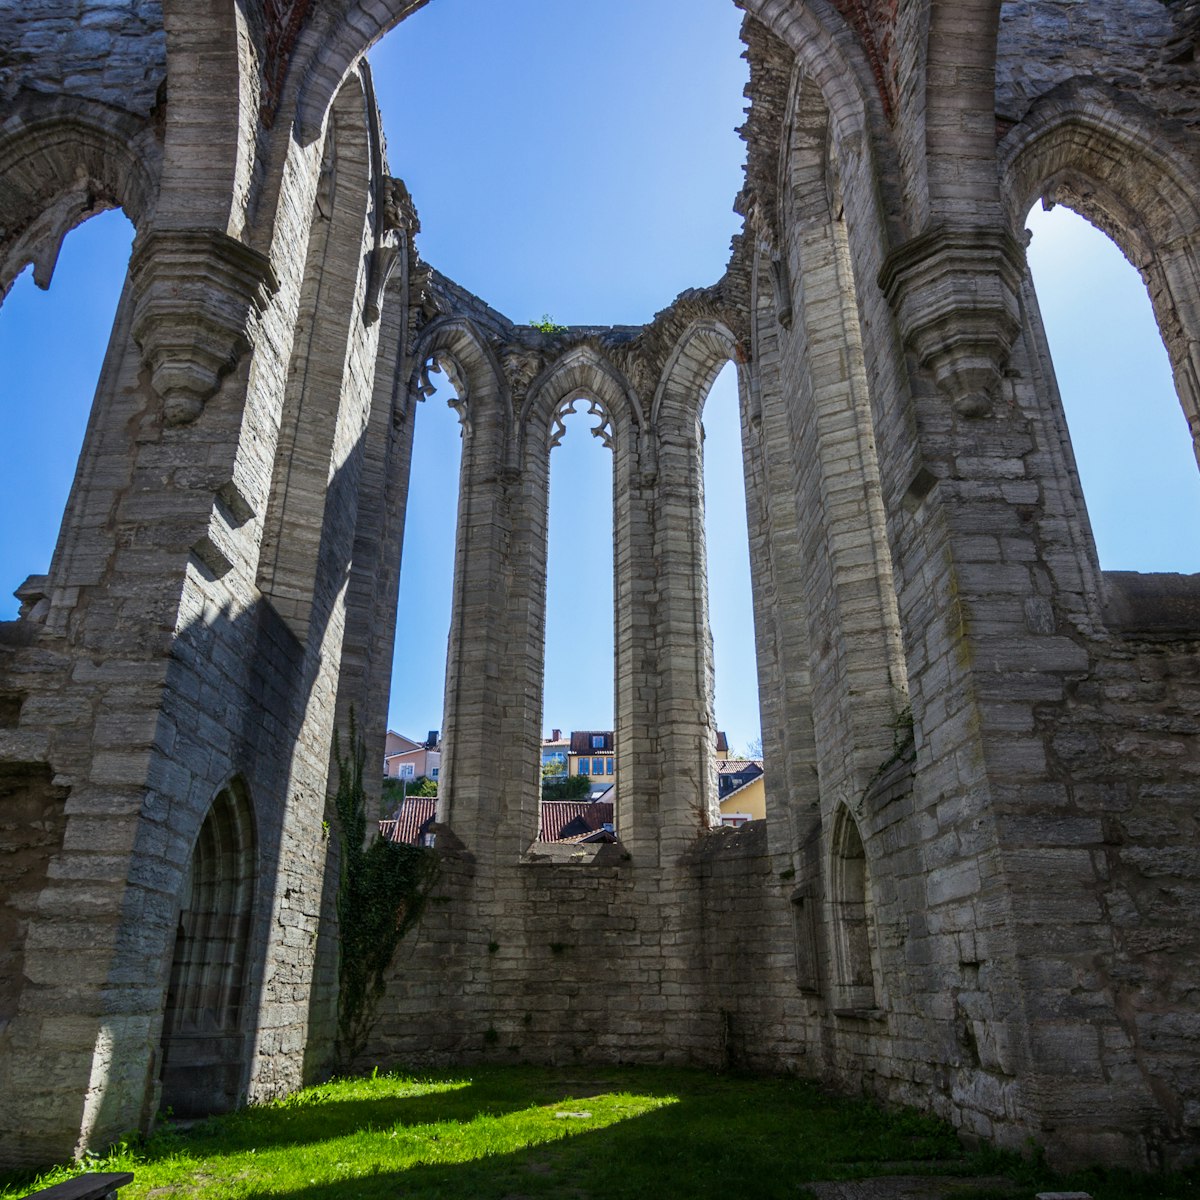 Inside the ruins of Saint Karin Cathedral in Visby, Sweden.